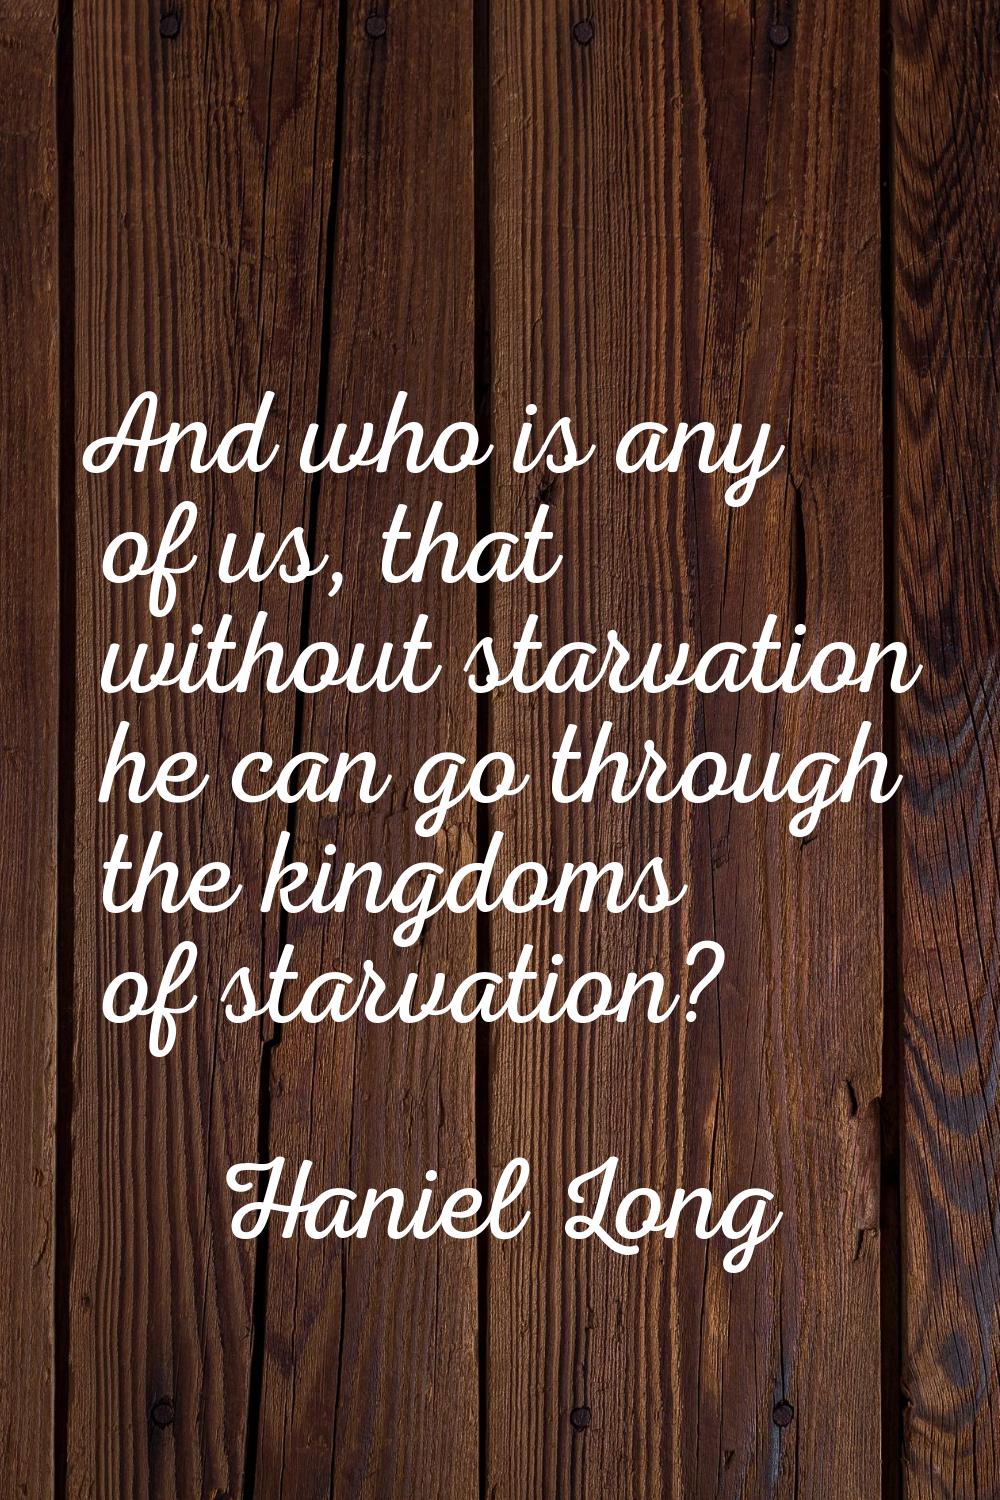 And who is any of us, that without starvation he can go through the kingdoms of starvation?